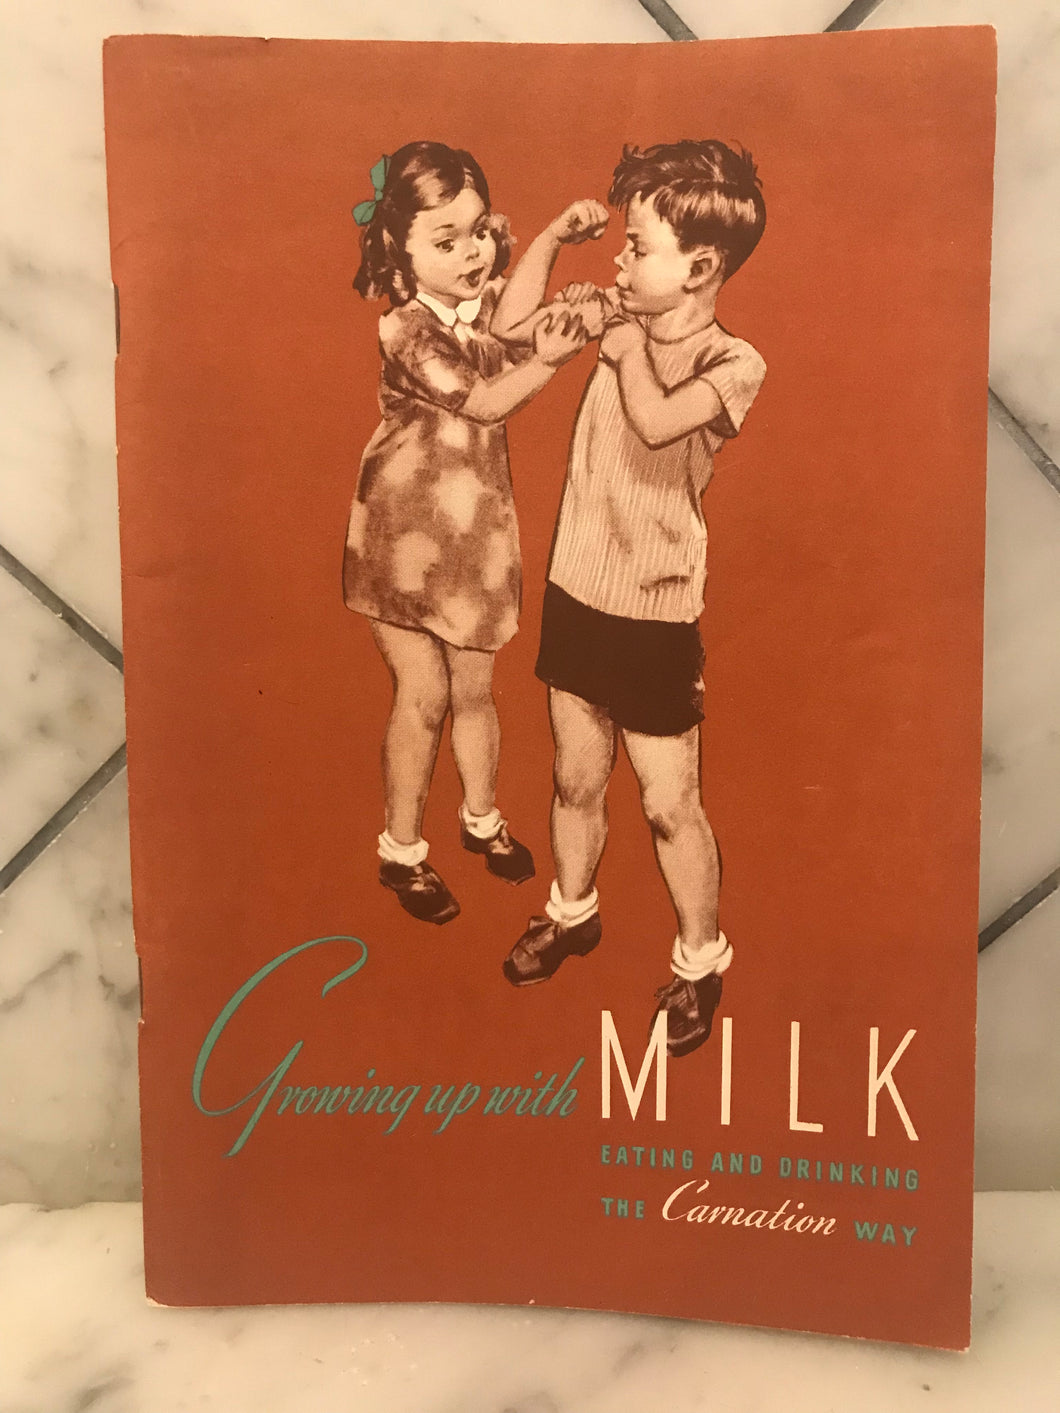 Growing Up with Milk, Eating and Drinking the Carnation Way